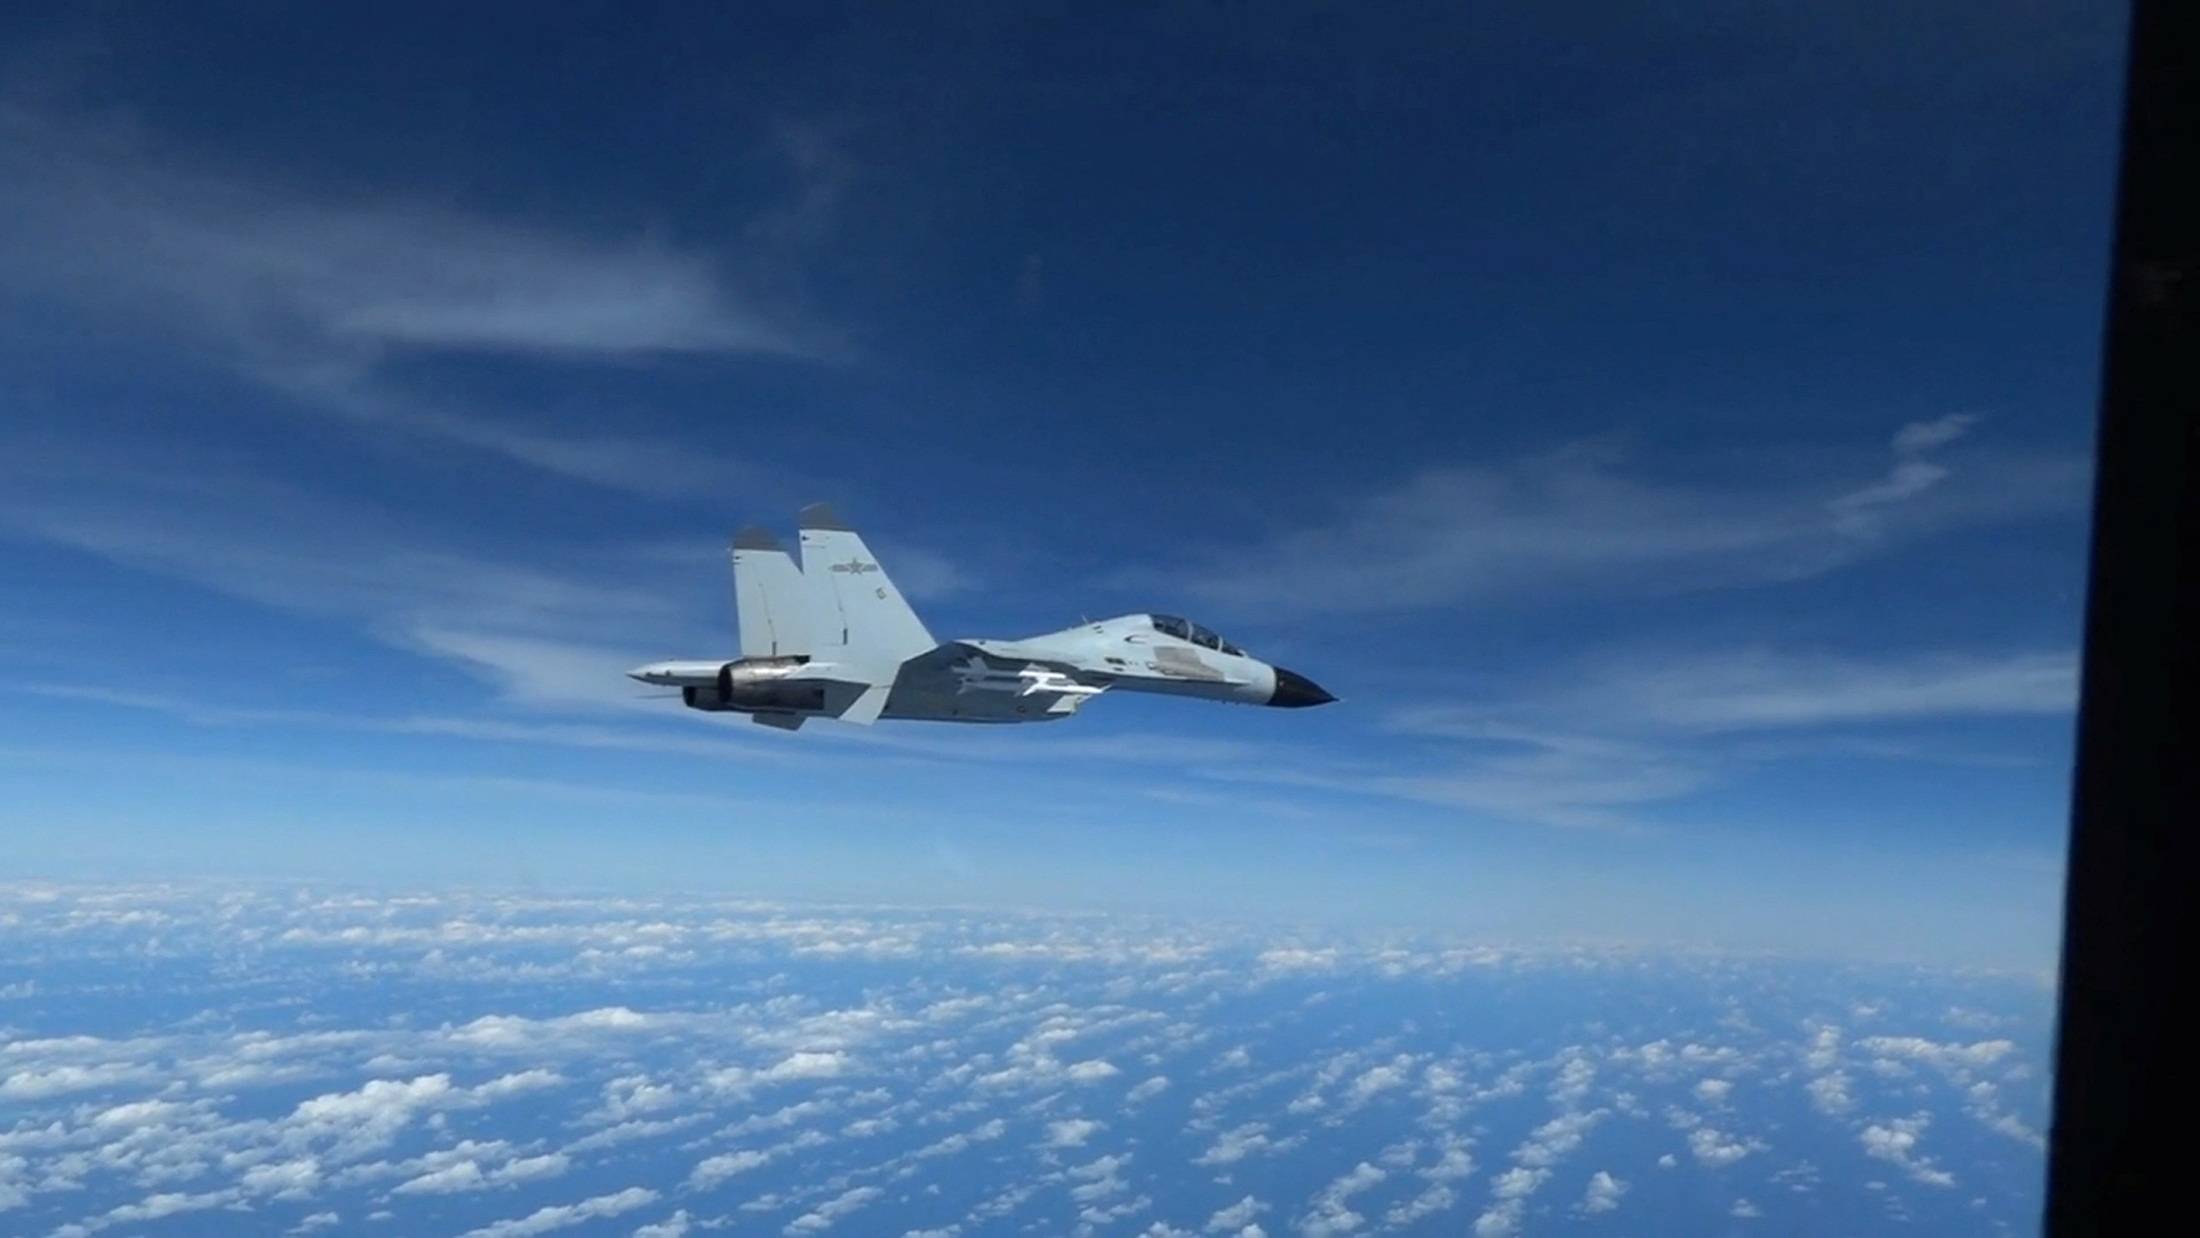 A Chinese Navy J-11 fighter jet is recorded flying close to a U.S. Air Force RC-135 aircraft in international airspace over the South China Sea, according to the U.S. military, in a still image from video taken Dec. 21.   | U.S. INDO-PACIFIC COMMAND / VIA REUTERS